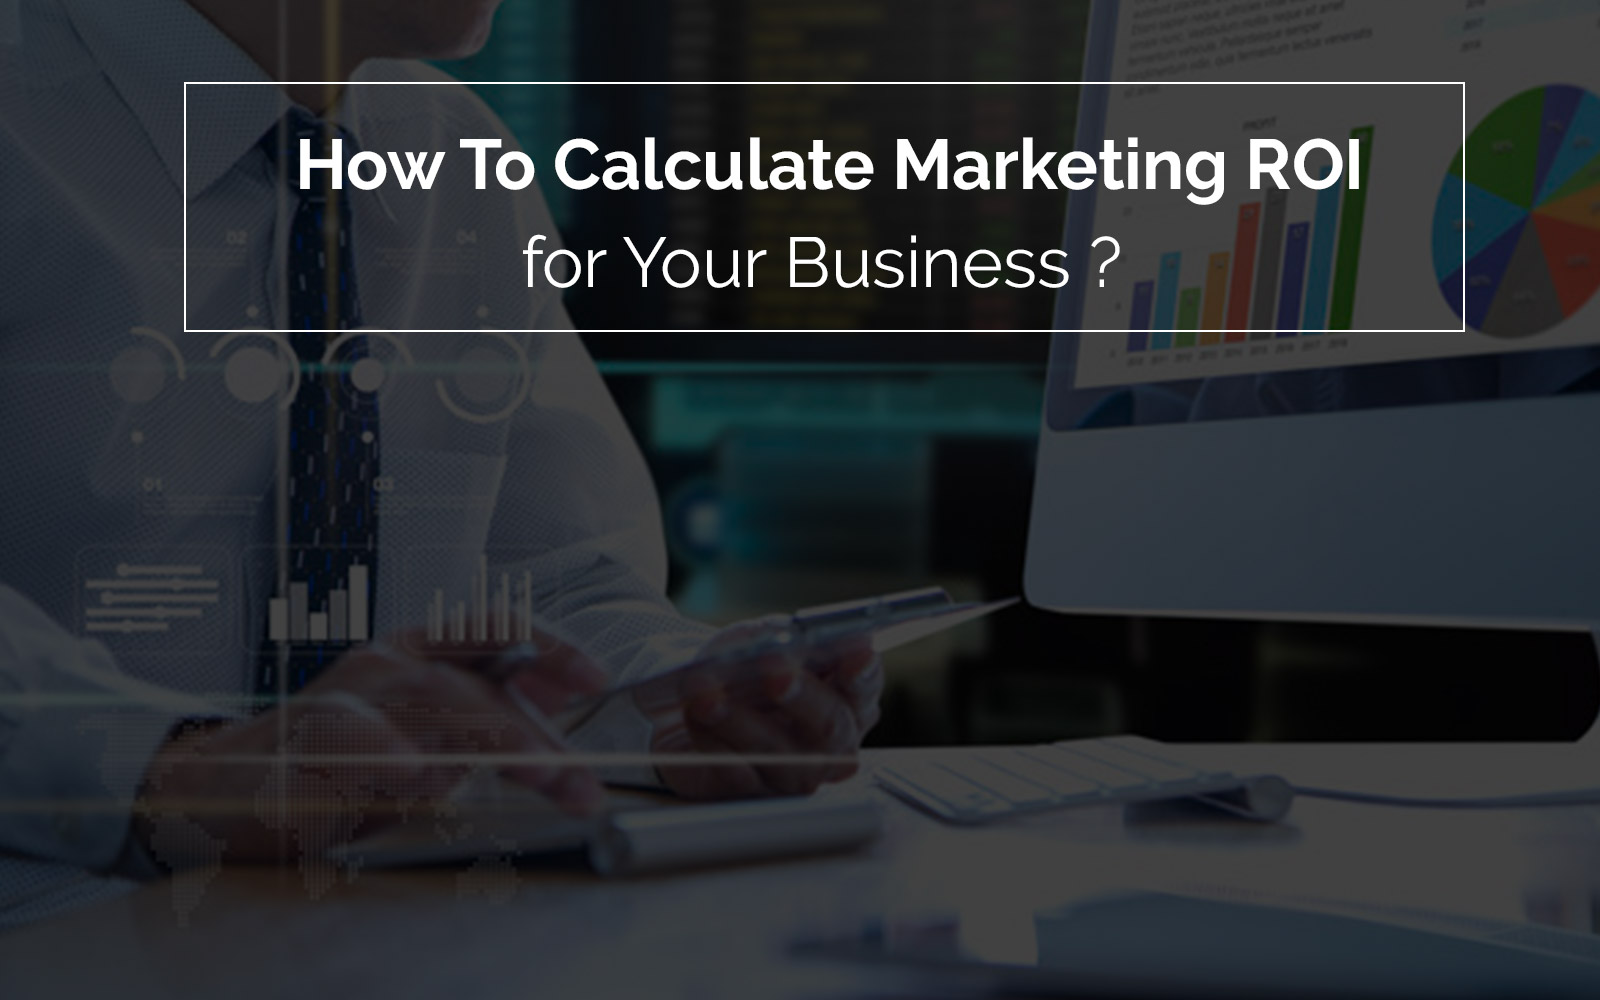 How To Calculate Marketing Return on investment (ROI) for Your Business?